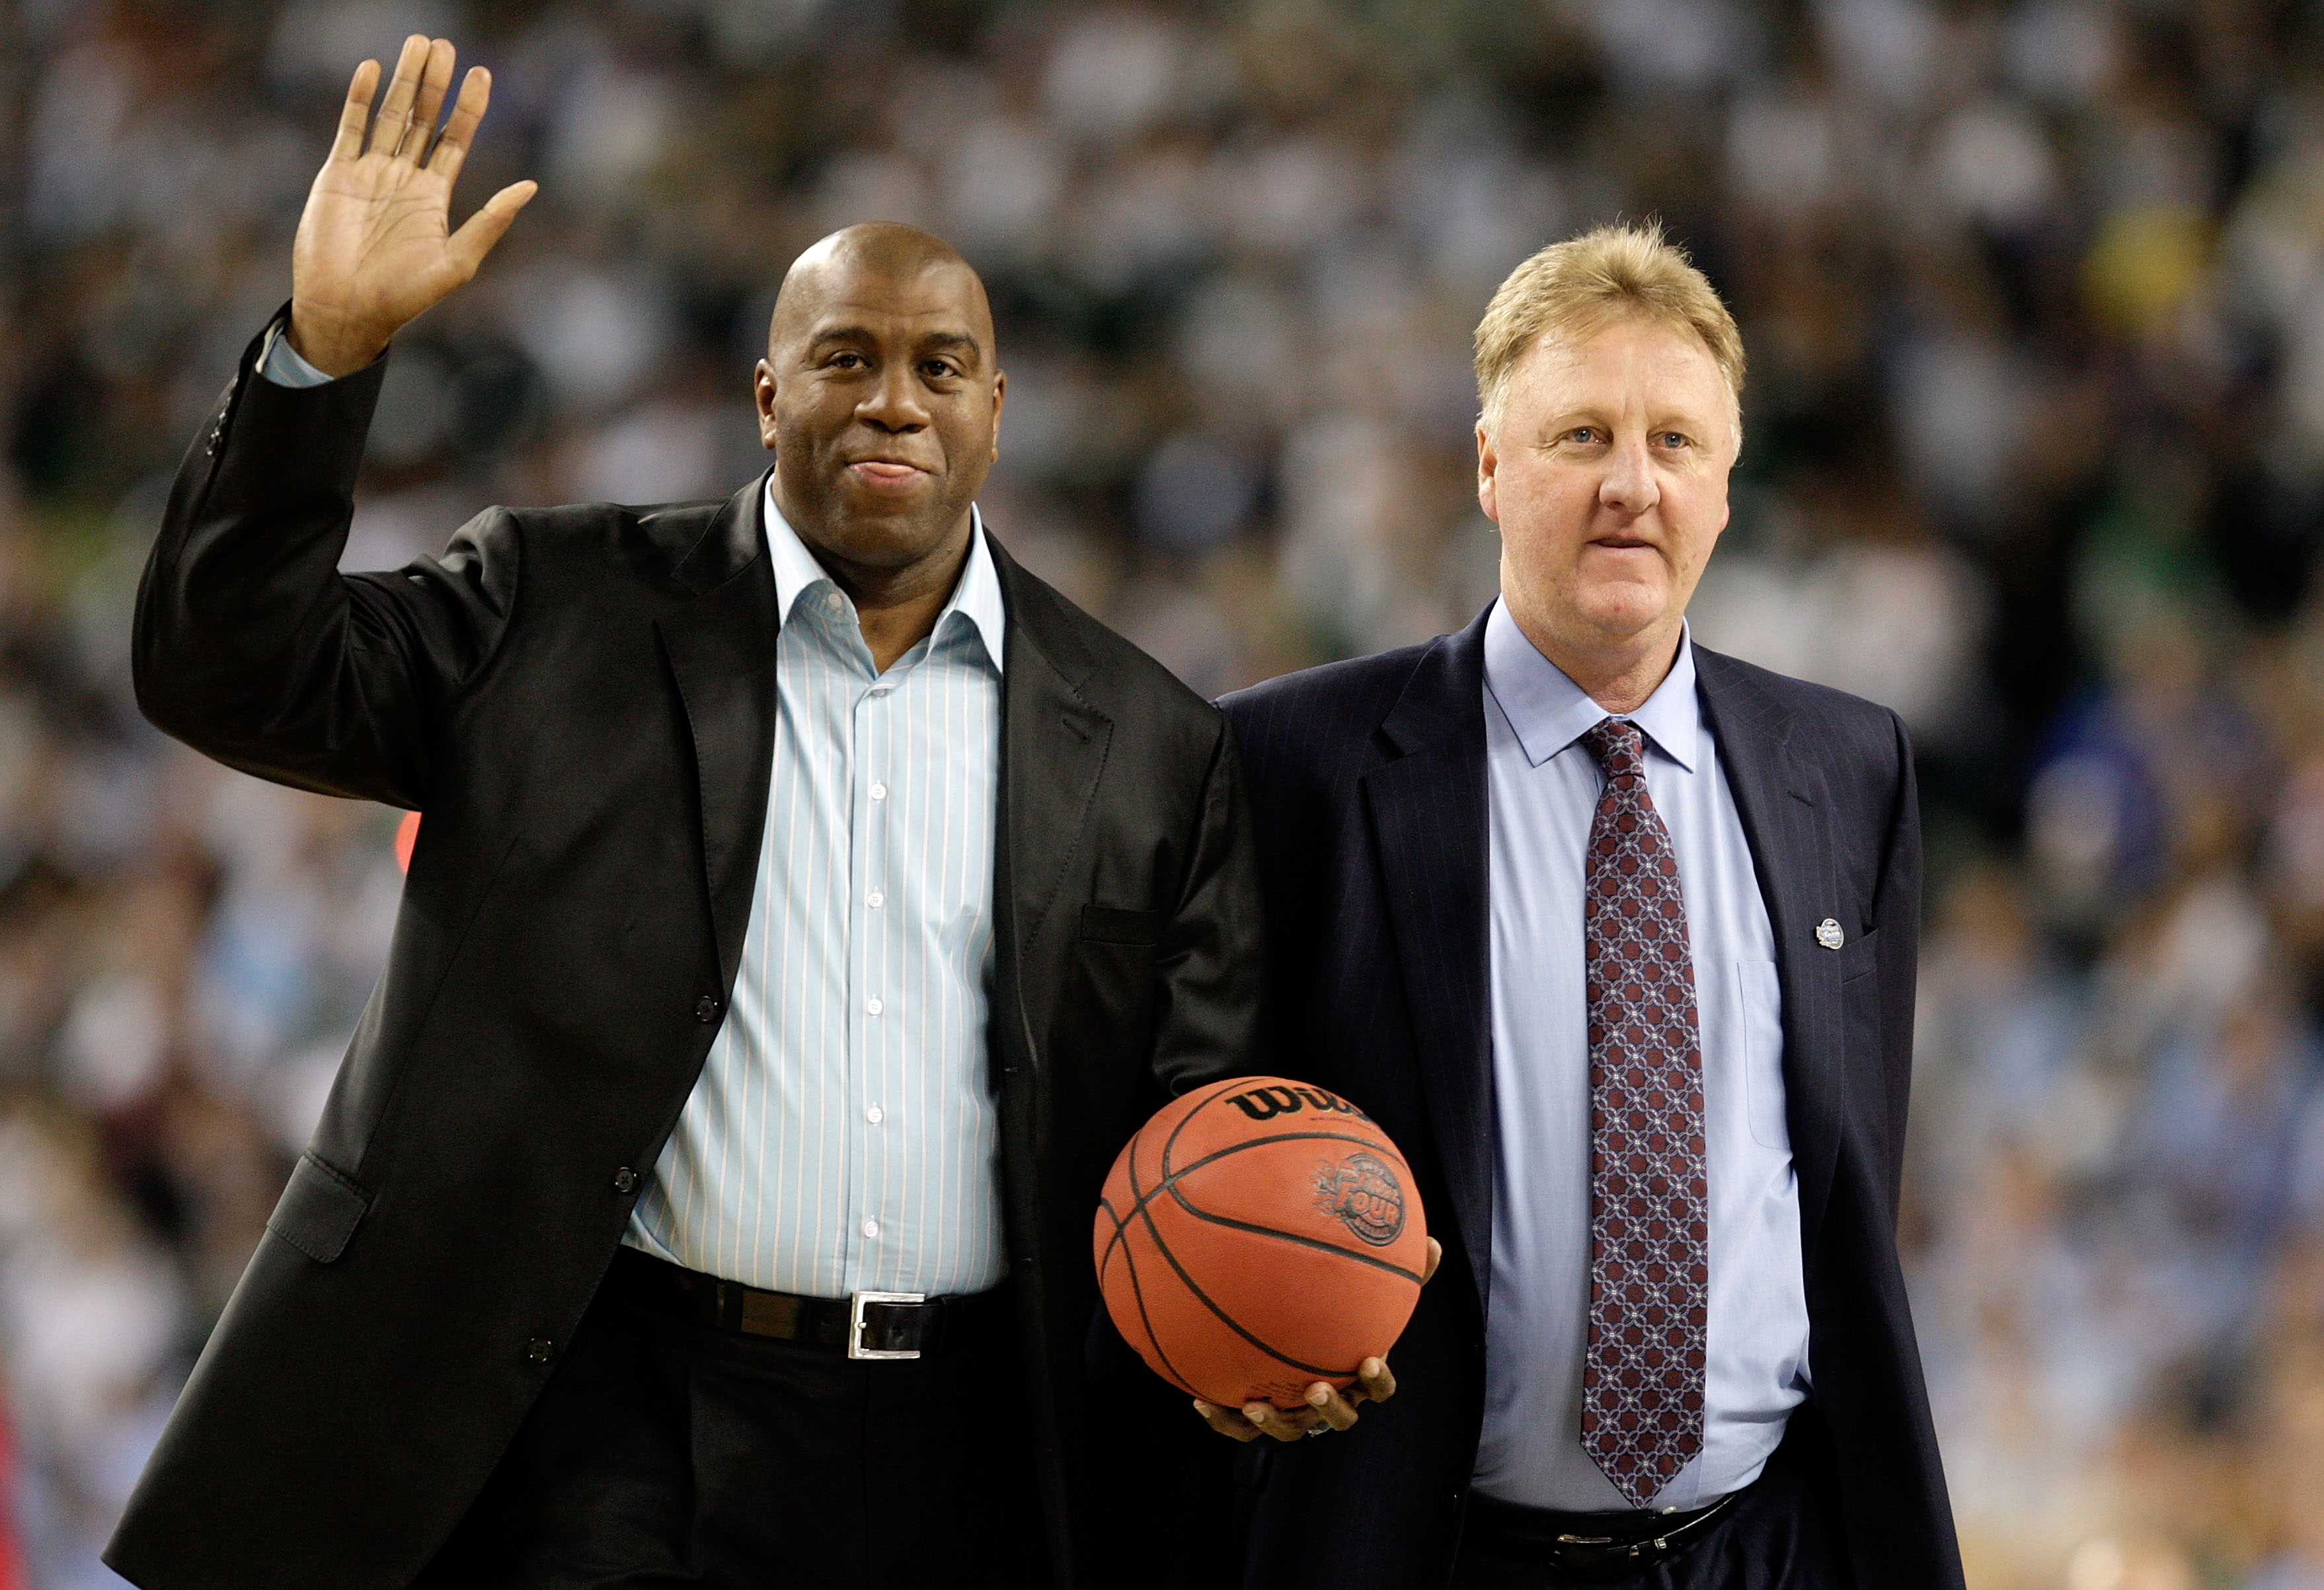 DETROIT - APRIL 06:  Larry Bird (R) and Earvin 'Magic' Johnson walk on the court to be honored for the 30th anniversary of their match up in 1979 NCAA Championship Game between Indiana State and Michigan State prior to the Michigan State Spartans playing